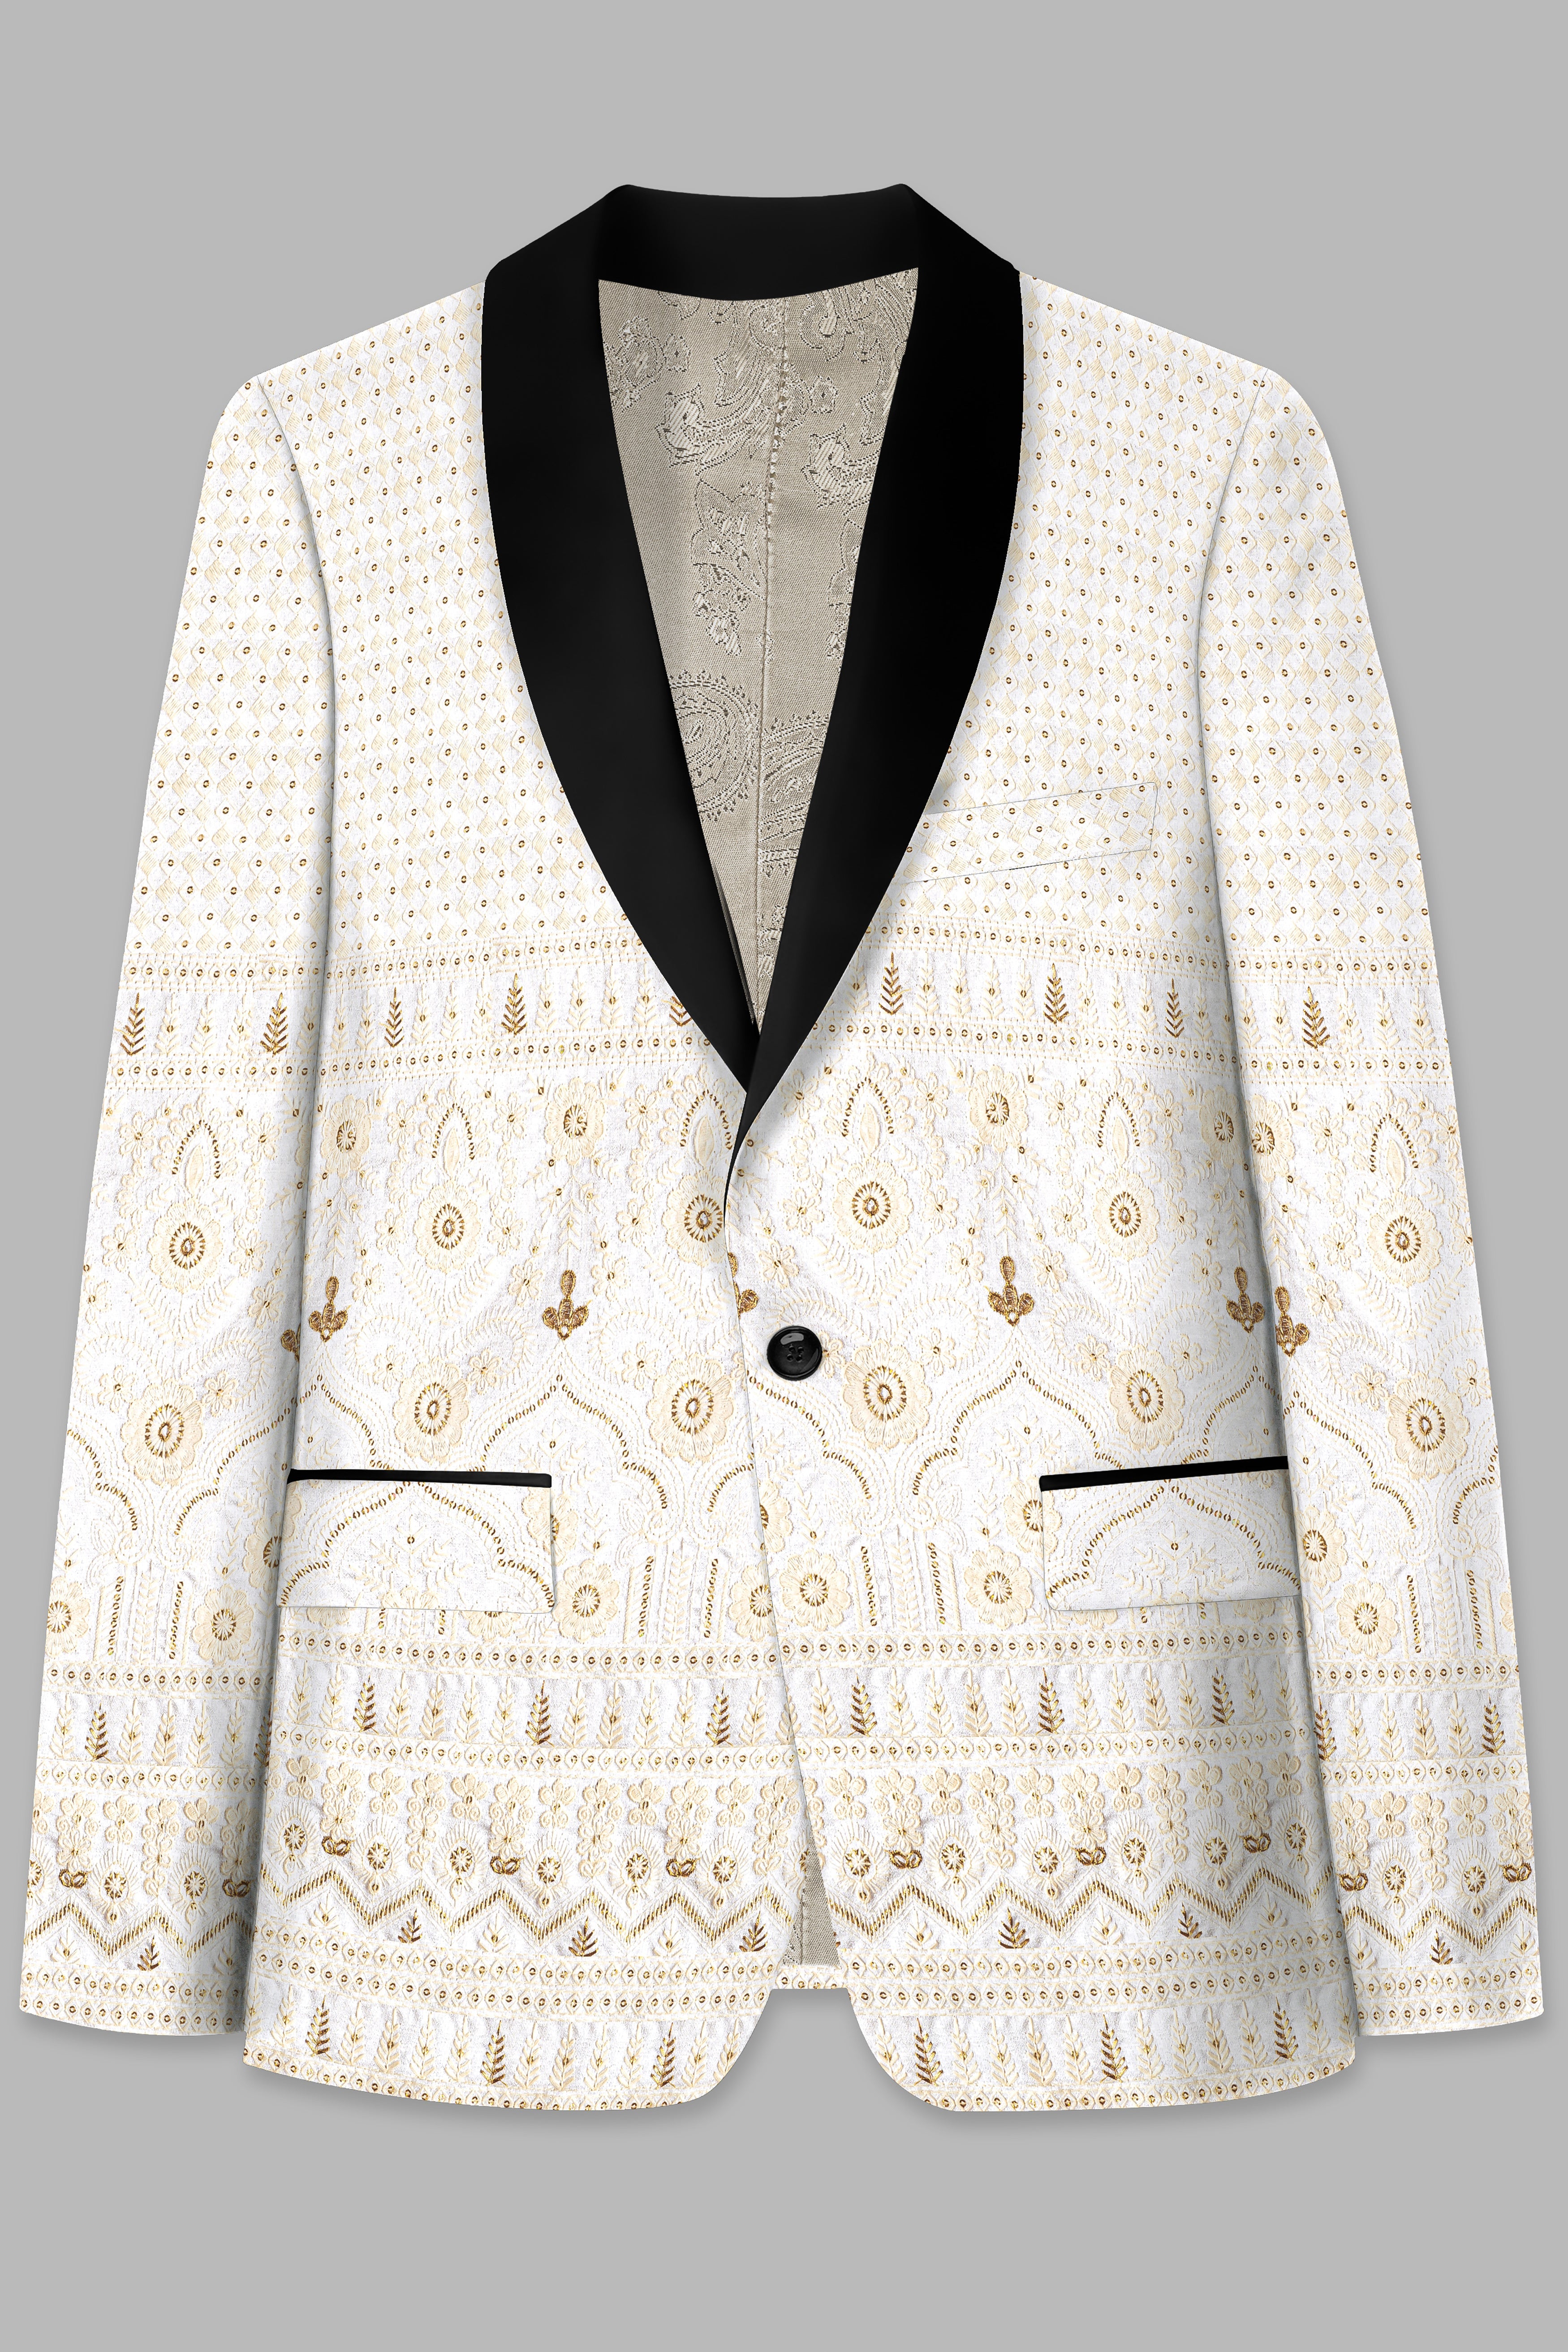 Sand Cream Thread and Sequin Embroidered Tuxedo Blazer BL3740-BKL-36, BL3740-BKL-38, BL3740-BKL-40, BL3740-BKL-42, BL3740-BKL-44, BL3740-BKL-46, BL3740-BKL-48, BL3740-BKL-50, BL3740-BKL-52, BL3740-BKL-54, BL3740-BKL-56, BL3740-BKL-58, BL3740-BKL-60